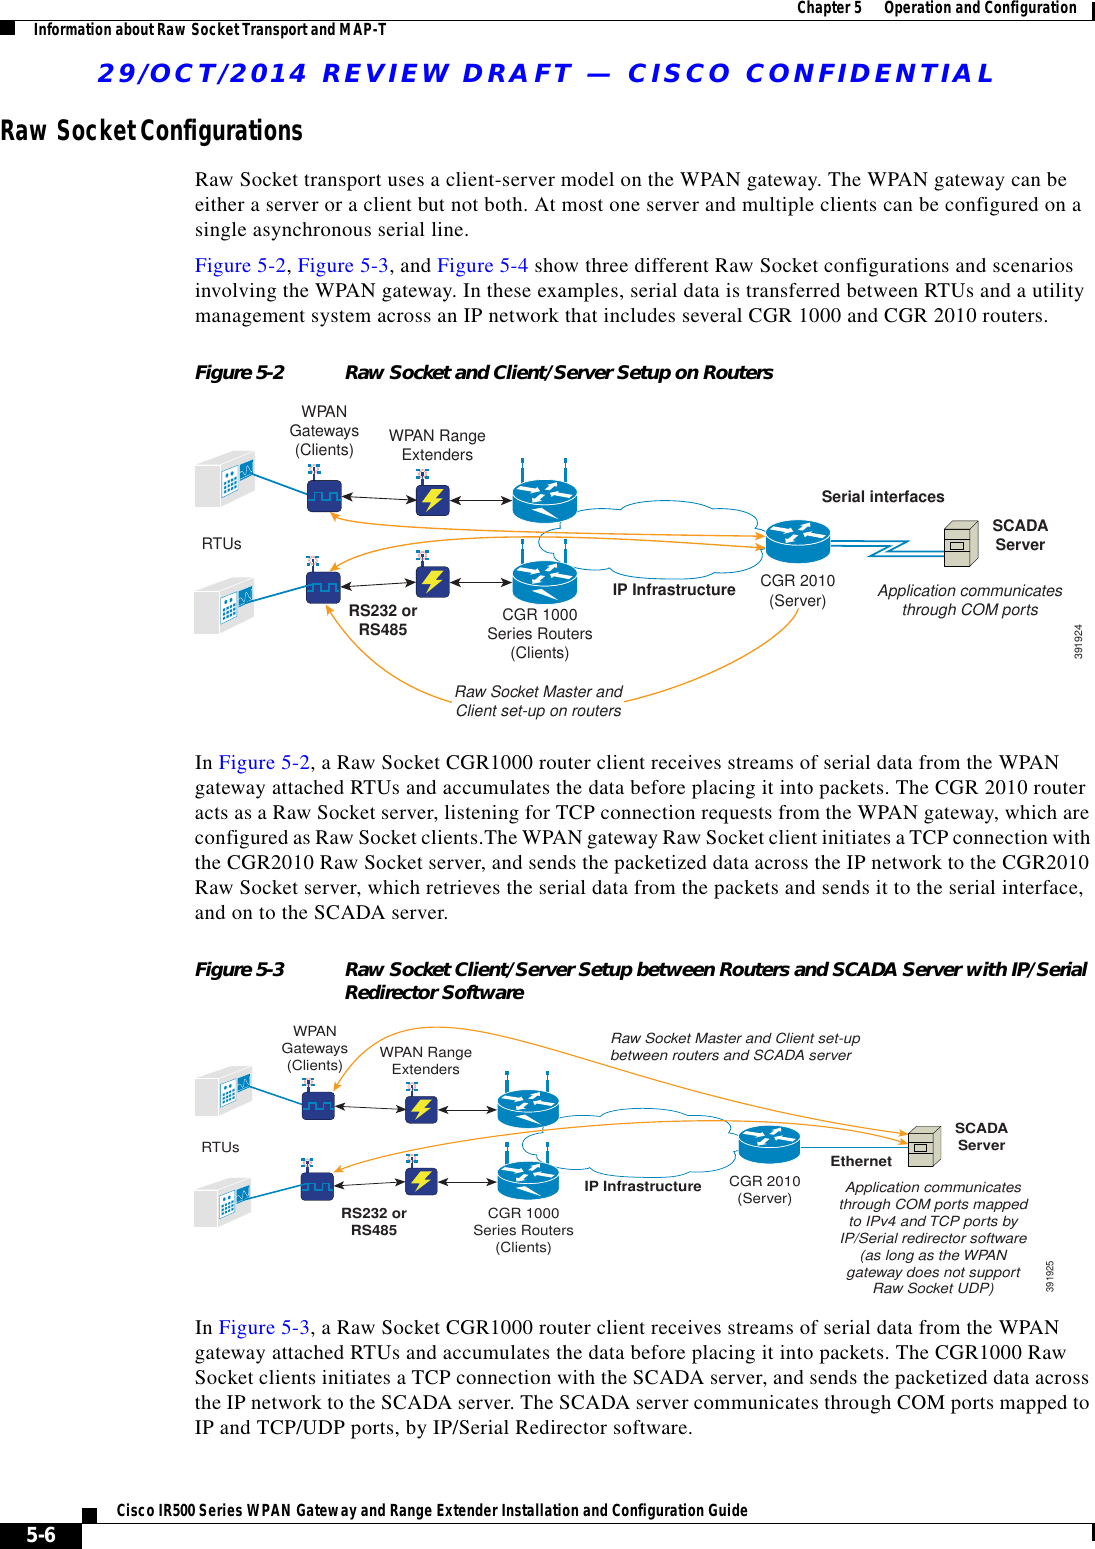 29/OCT/2014 REVIEW DRAFT — CISCO CONFIDENTIAL5-6Cisco IR500 Series WPAN Gateway and Range Extender Installation and Configuration Guide  Chapter 5      Operation and Configuration Information about Raw Socket Transport and MAP-TRaw Socket ConfigurationsRaw Socket transport uses a client-server model on the WPAN gateway. The WPAN gateway can be either a server or a client but not both. At most one server and multiple clients can be configured on a single asynchronous serial line.Figure 5-2, Figure 5-3, and Figure 5-4 show three different Raw Socket configurations and scenarios involving the WPAN gateway. In these examples, serial data is transferred between RTUs and a utility management system across an IP network that includes several CGR 1000 and CGR 2010 routers.Figure 5-2 Raw Socket and Client/Server Setup on RoutersApplication communicatesthrough COM portsCGR 1000Series Routers(Clients)CGR 2010(Server)RS232 orRS485IP InfrastructureSerial interfacesSCADAServer391924RTUsWPAN RangeExtendersWPANGateways(Clients)Raw Socket Master andClient set-up on routersIn Figure 5-2, a Raw Socket CGR1000 router client receives streams of serial data from the WPAN gateway attached RTUs and accumulates the data before placing it into packets. The CGR 2010 router acts as a Raw Socket server, listening for TCP connection requests from the WPAN gateway, which are configured as Raw Socket clients.The WPAN gateway Raw Socket client initiates a TCP connection with the CGR2010 Raw Socket server, and sends the packetized data across the IP network to the CGR2010 Raw Socket server, which retrieves the serial data from the packets and sends it to the serial interface, and on to the SCADA server.Figure 5-3 Raw Socket Client/Server Setup between Routers and SCADA Server with IP/Serial Redirector SoftwareRaw Socket Master and Client set-upbetween routers and SCADA serverApplication communicatesthrough COM ports mappedto IPv4 and TCP ports byIP/Serial redirector software(as long as the WPANgateway does not supportRaw Socket UDP)CGR 1000Series Routers(Clients)CGR 2010(Server)IP InfrastructureEthernetSCADAServer391925RS232 orRS485RTUsWPAN RangeExtendersWPANGateways(Clients)In Figure 5-3, a Raw Socket CGR1000 router client receives streams of serial data from the WPAN gateway attached RTUs and accumulates the data before placing it into packets. The CGR1000 Raw Socket clients initiates a TCP connection with the SCADA server, and sends the packetized data across the IP network to the SCADA server. The SCADA server communicates through COM ports mapped to IP and TCP/UDP ports, by IP/Serial Redirector software.